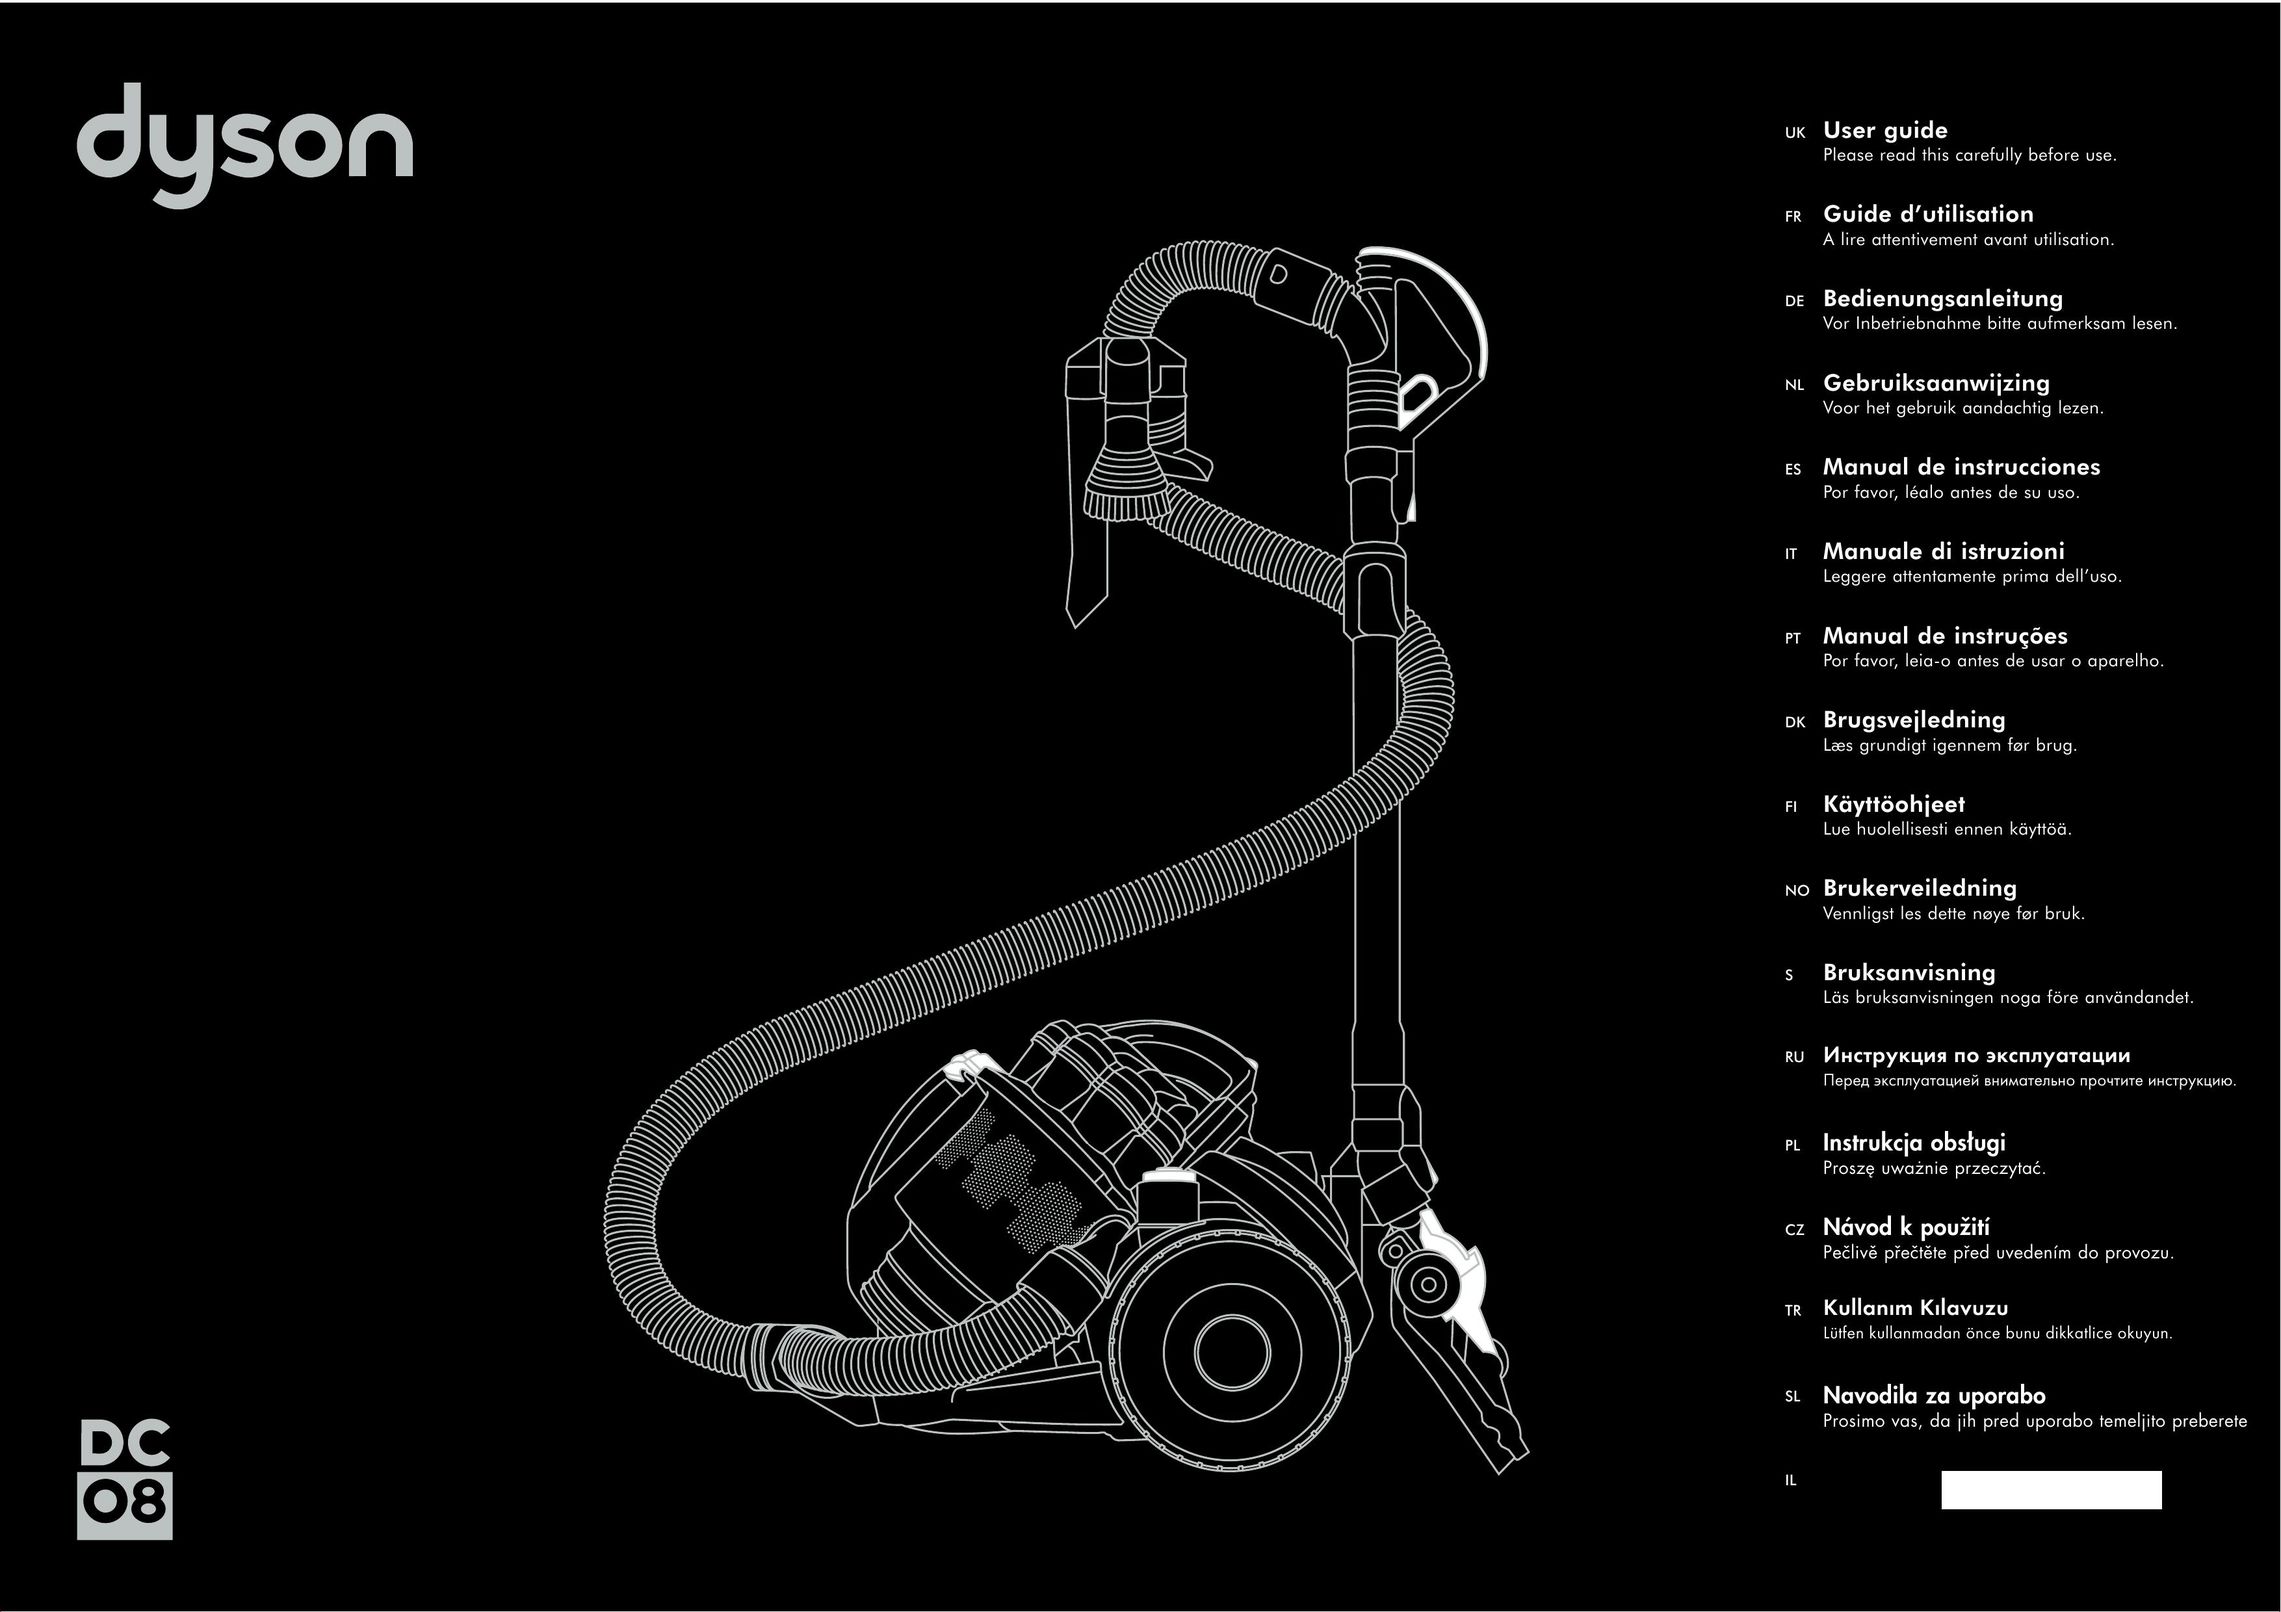 Dyson DC08 Vacuum Cleaner User Manual